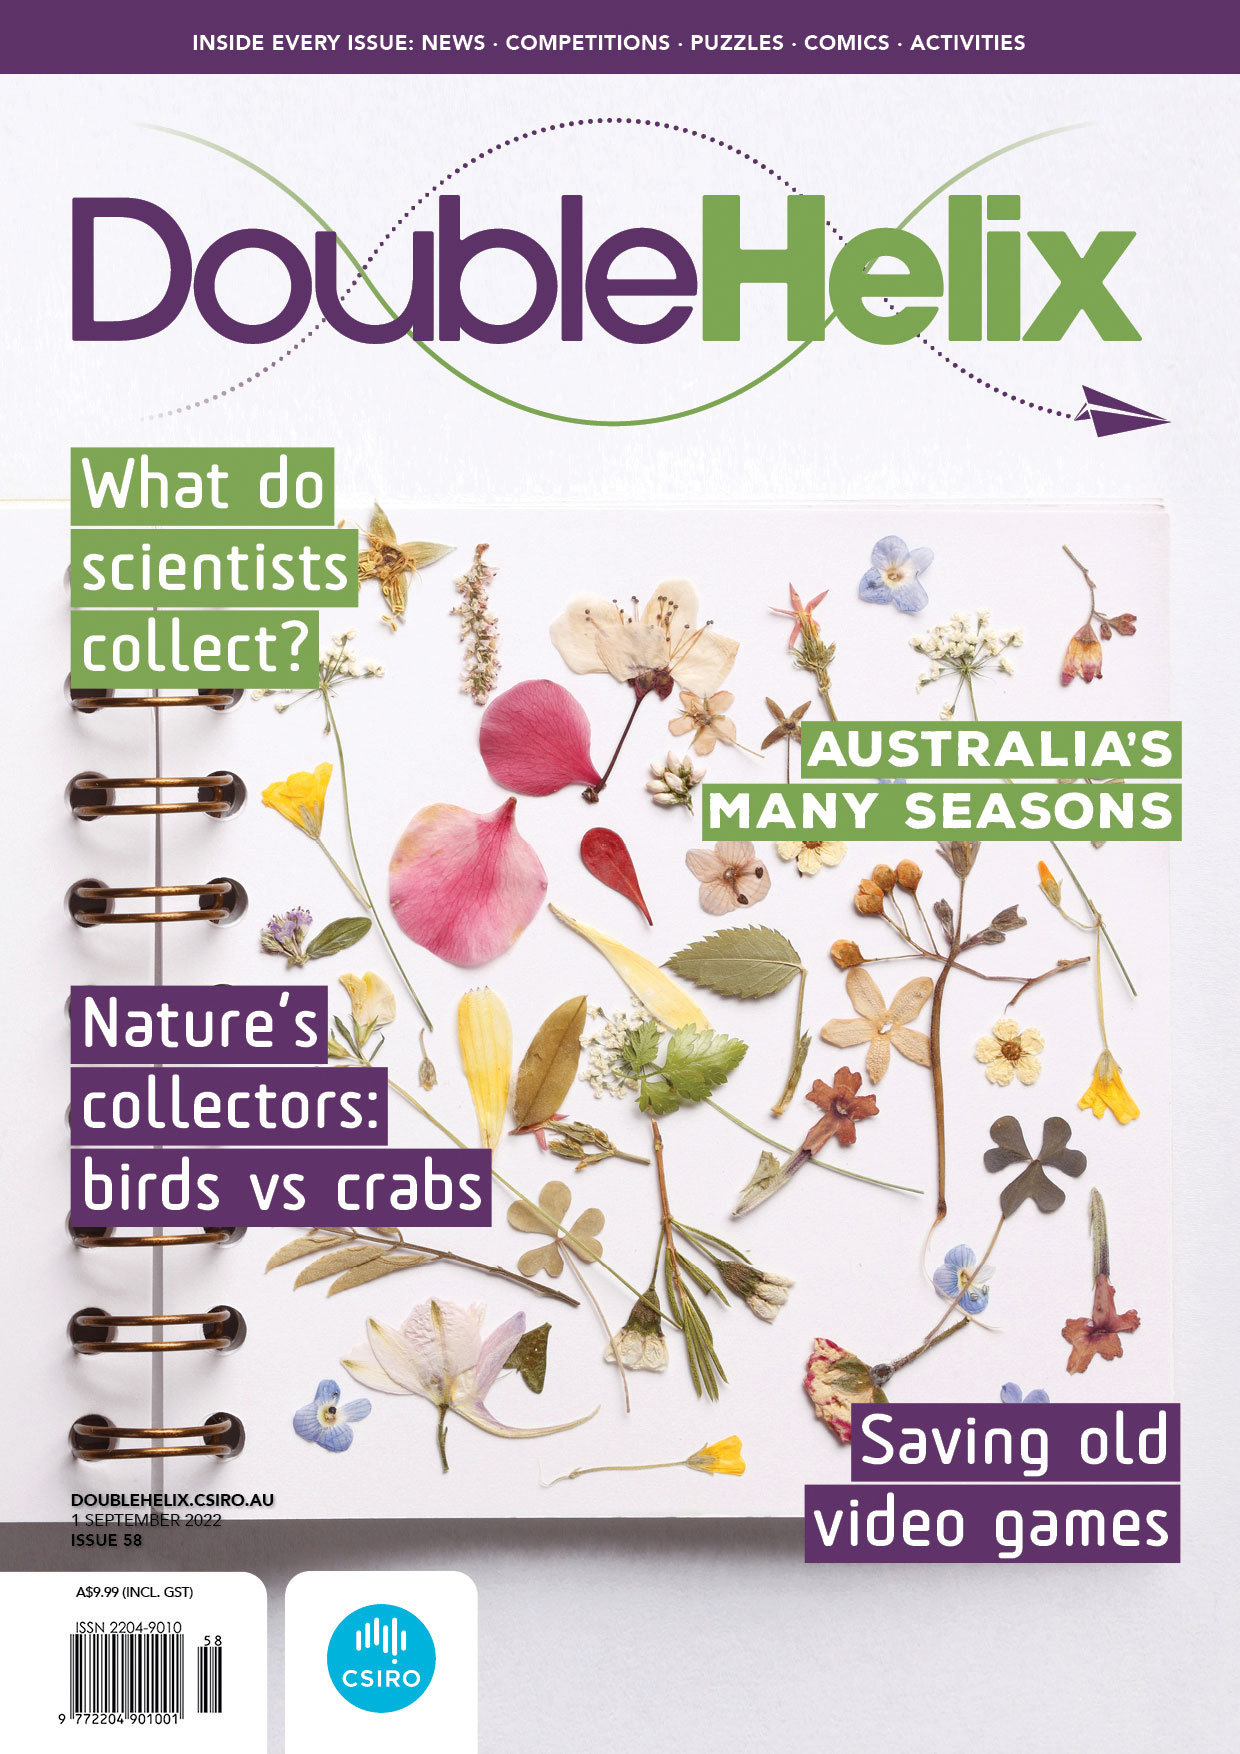 Double Helix 58 cover image of pressed flowers